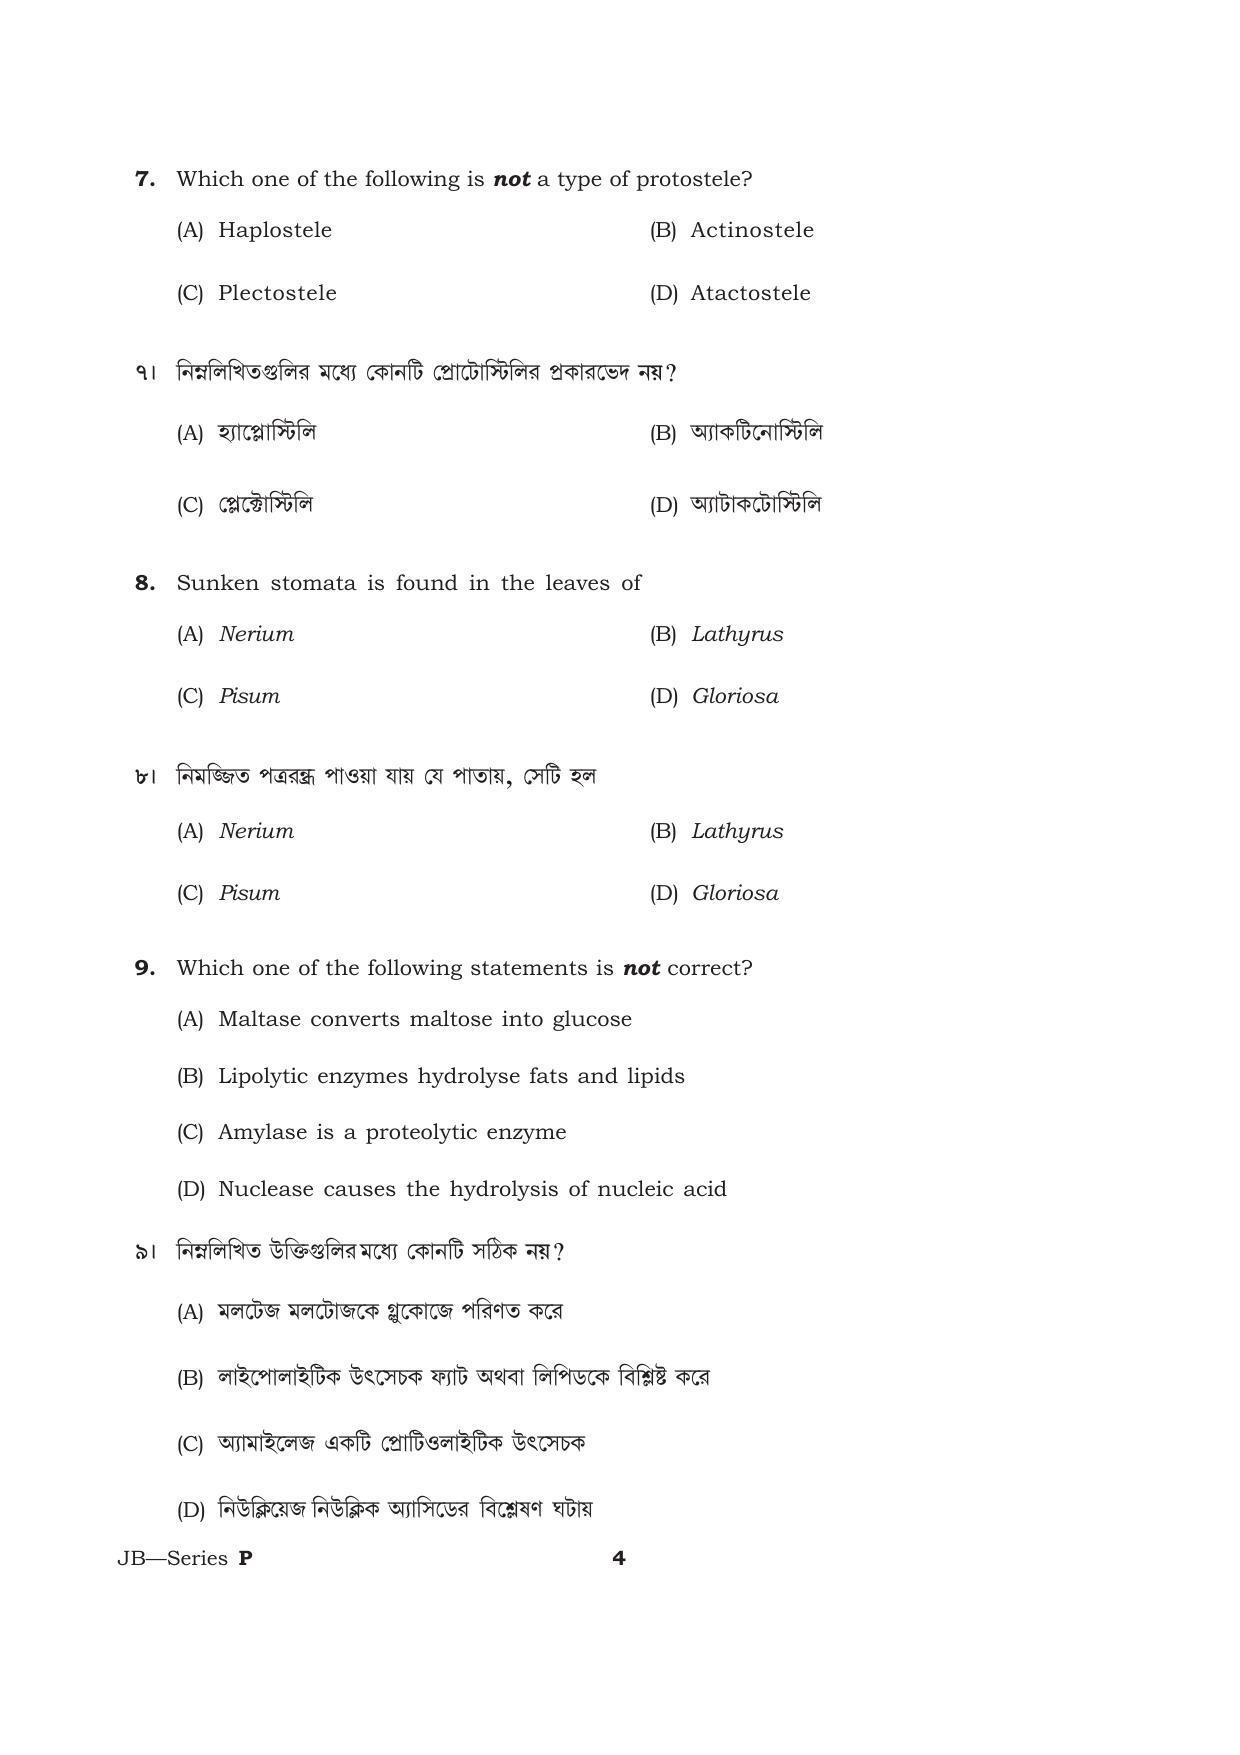 TBJEE Question Paper 2021 - Biology - Page 4